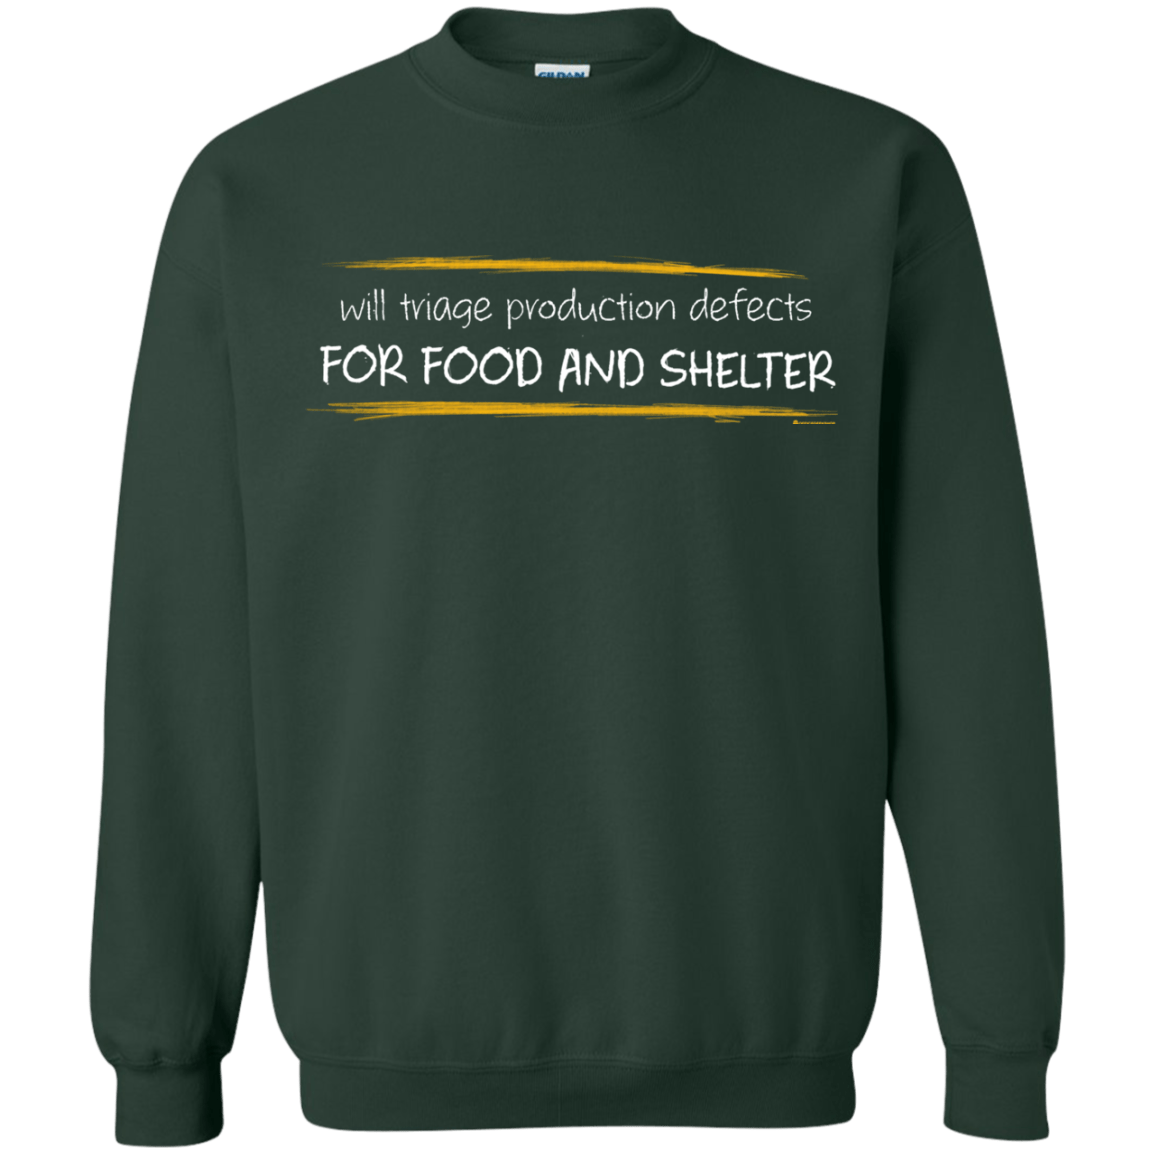 Sweatshirts Forest Green / Small Triaging Defects For Food And Shelter Crewneck Sweatshirt